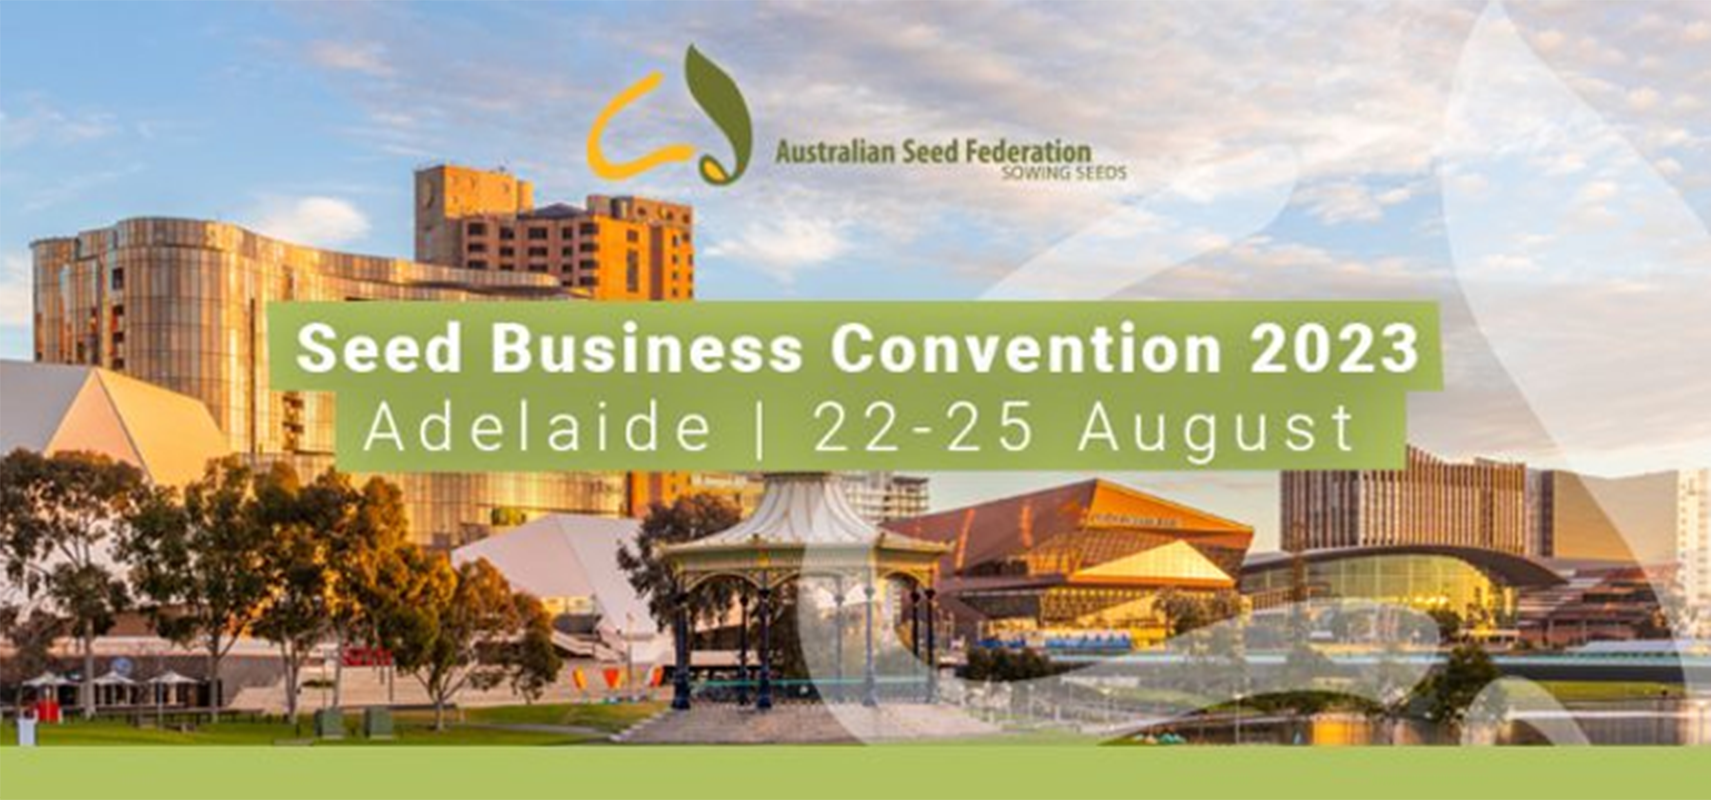 Seed Business Convention 2023